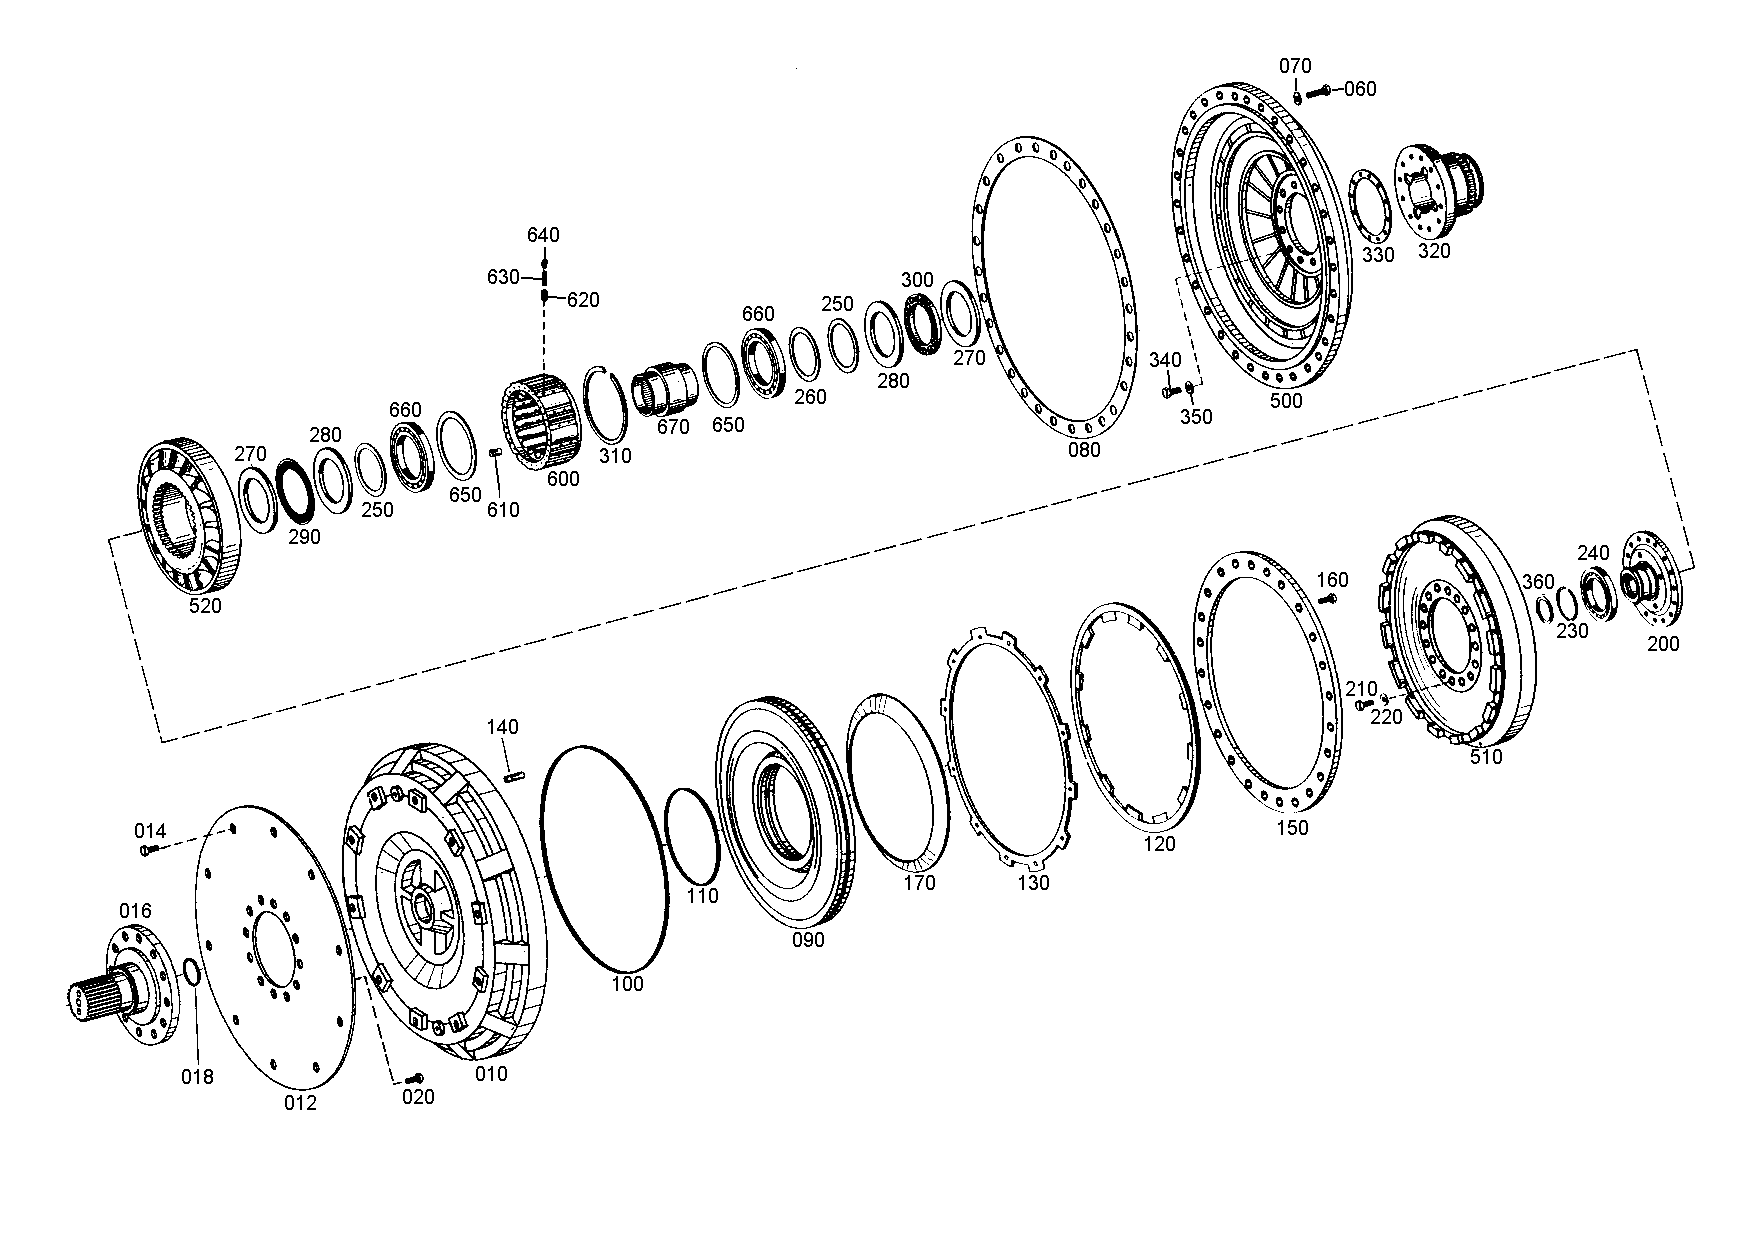 drawing for BEISSBARTH & MUELLER GMBH & CO. 09398062 - END SHIM